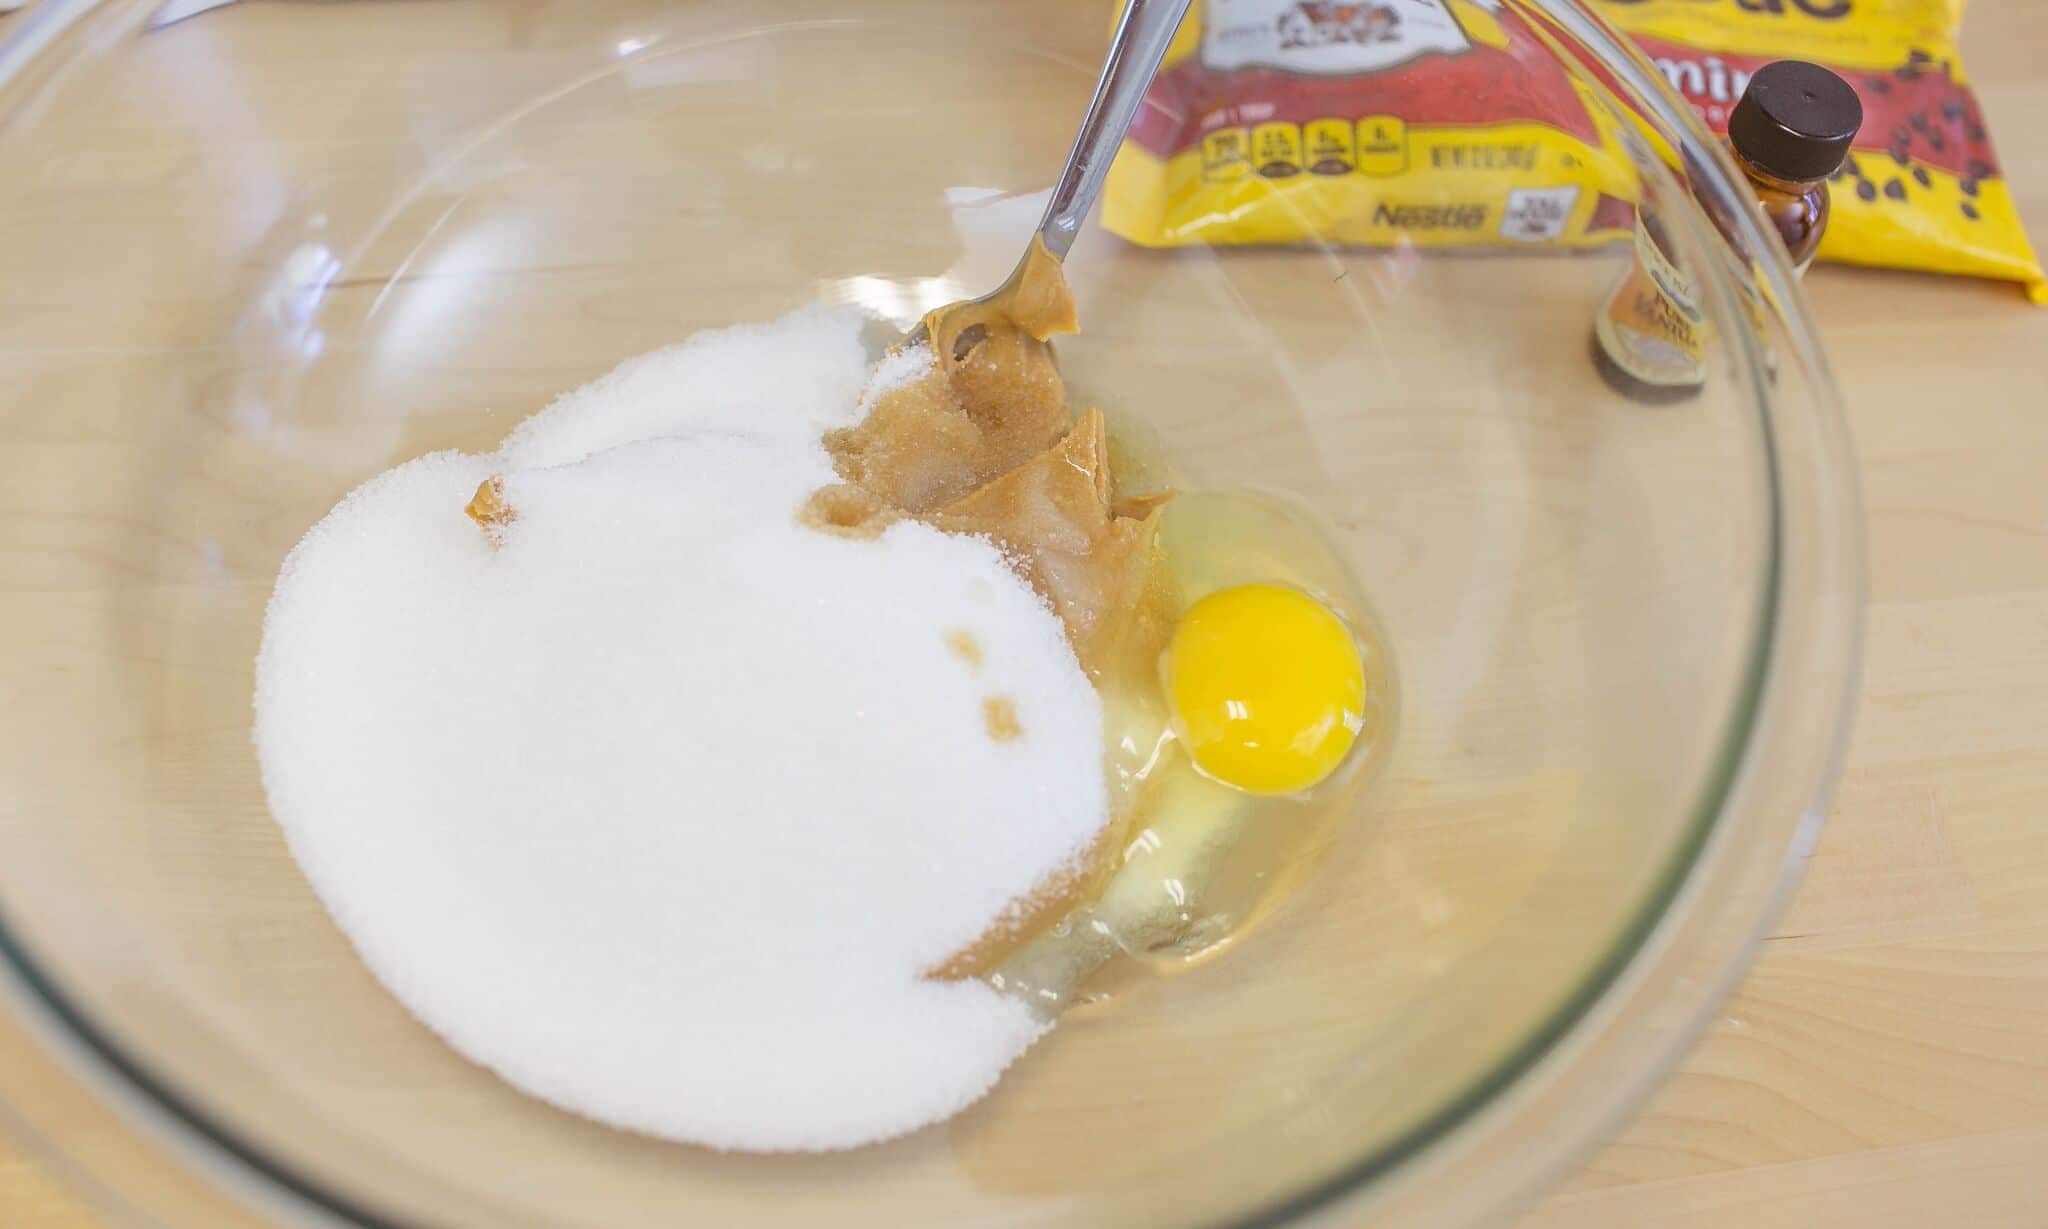 Beat together sugar, peanut butter, vanilla and egg in mixing bowl.